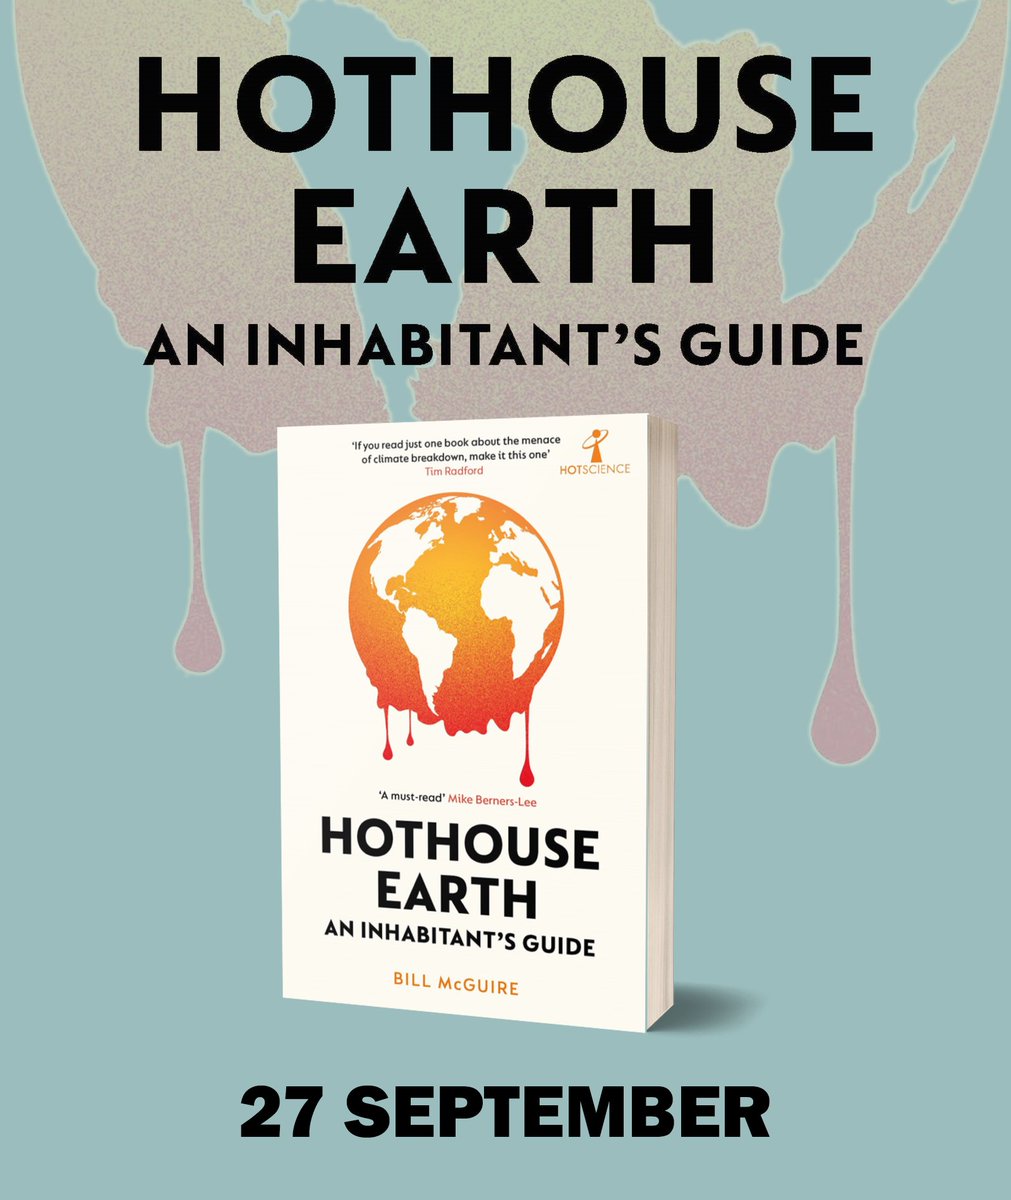 Out in the US this coming Tuesday (27th).

If you are seriously interested in the truth about #climate breakdown and what it will be like to live on #HothouseEarth then this is the book for you.